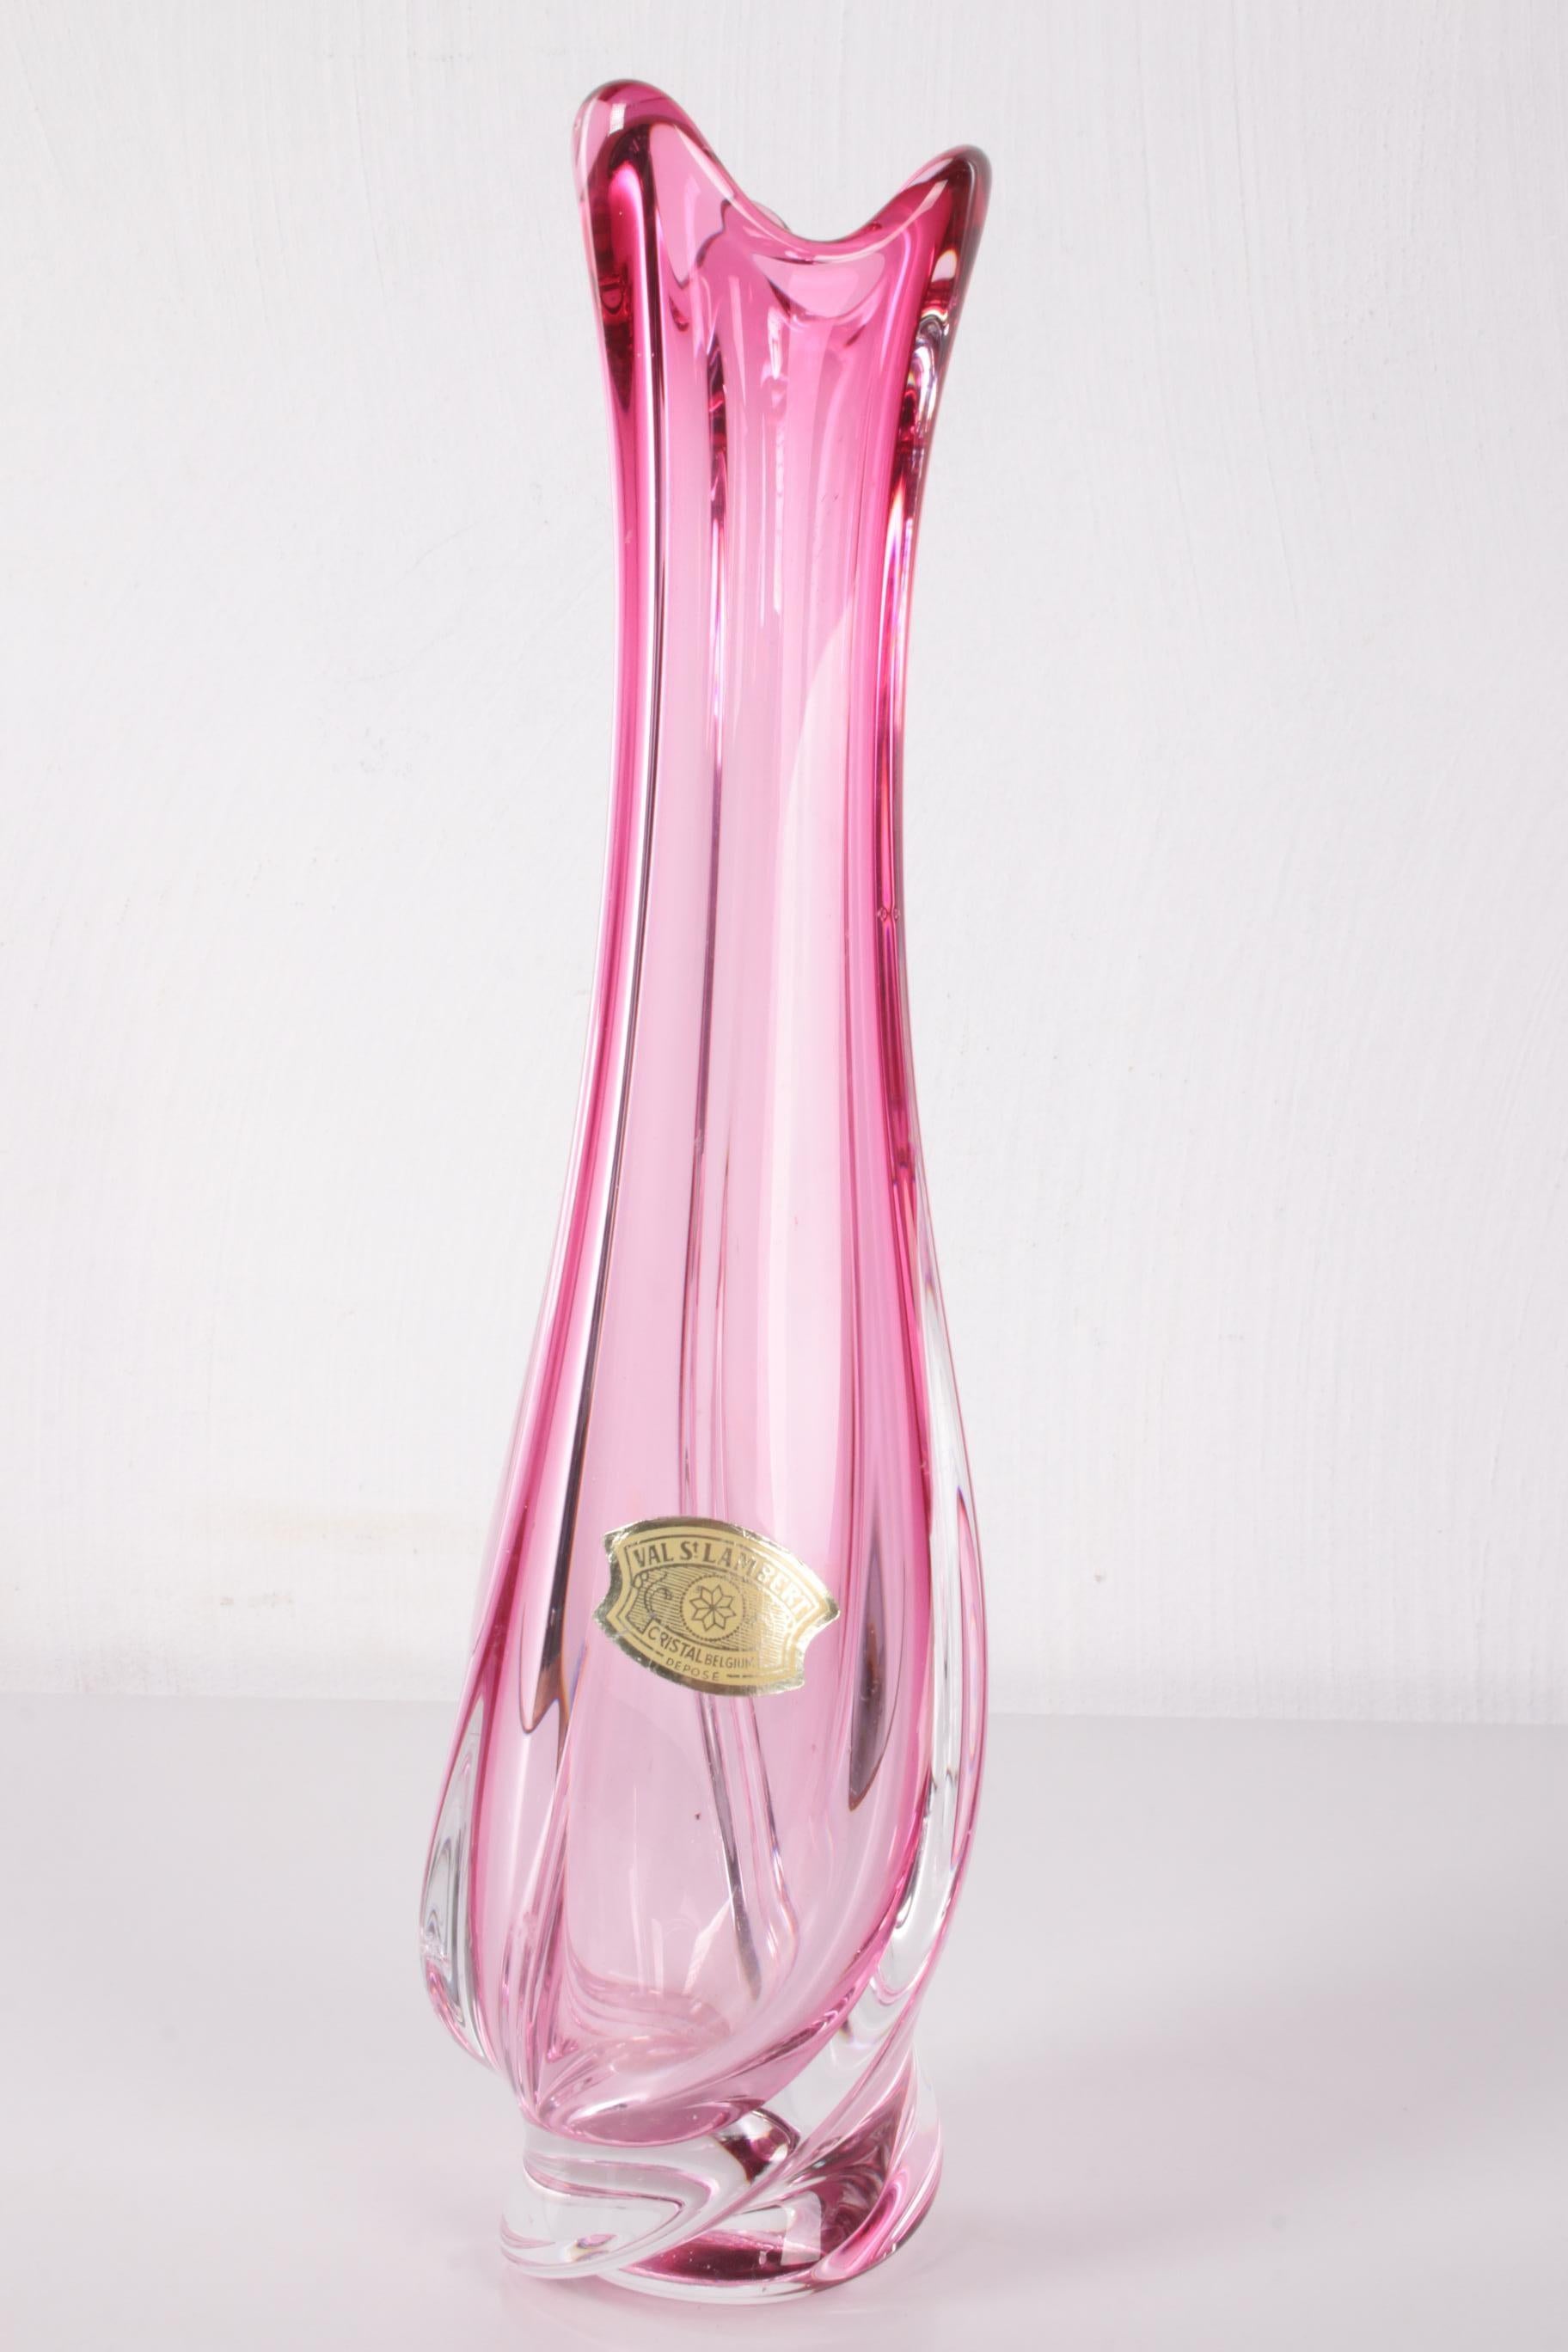 Vintage crystal vase from Val St-Lambert Belgium 1960

Pink crystal Val Saint Lambert large vase.

Handmade piece made in Belgium in the 60's. The twisted crystal is hand blown and bears the original label.

Beautiful pink intended as a vase